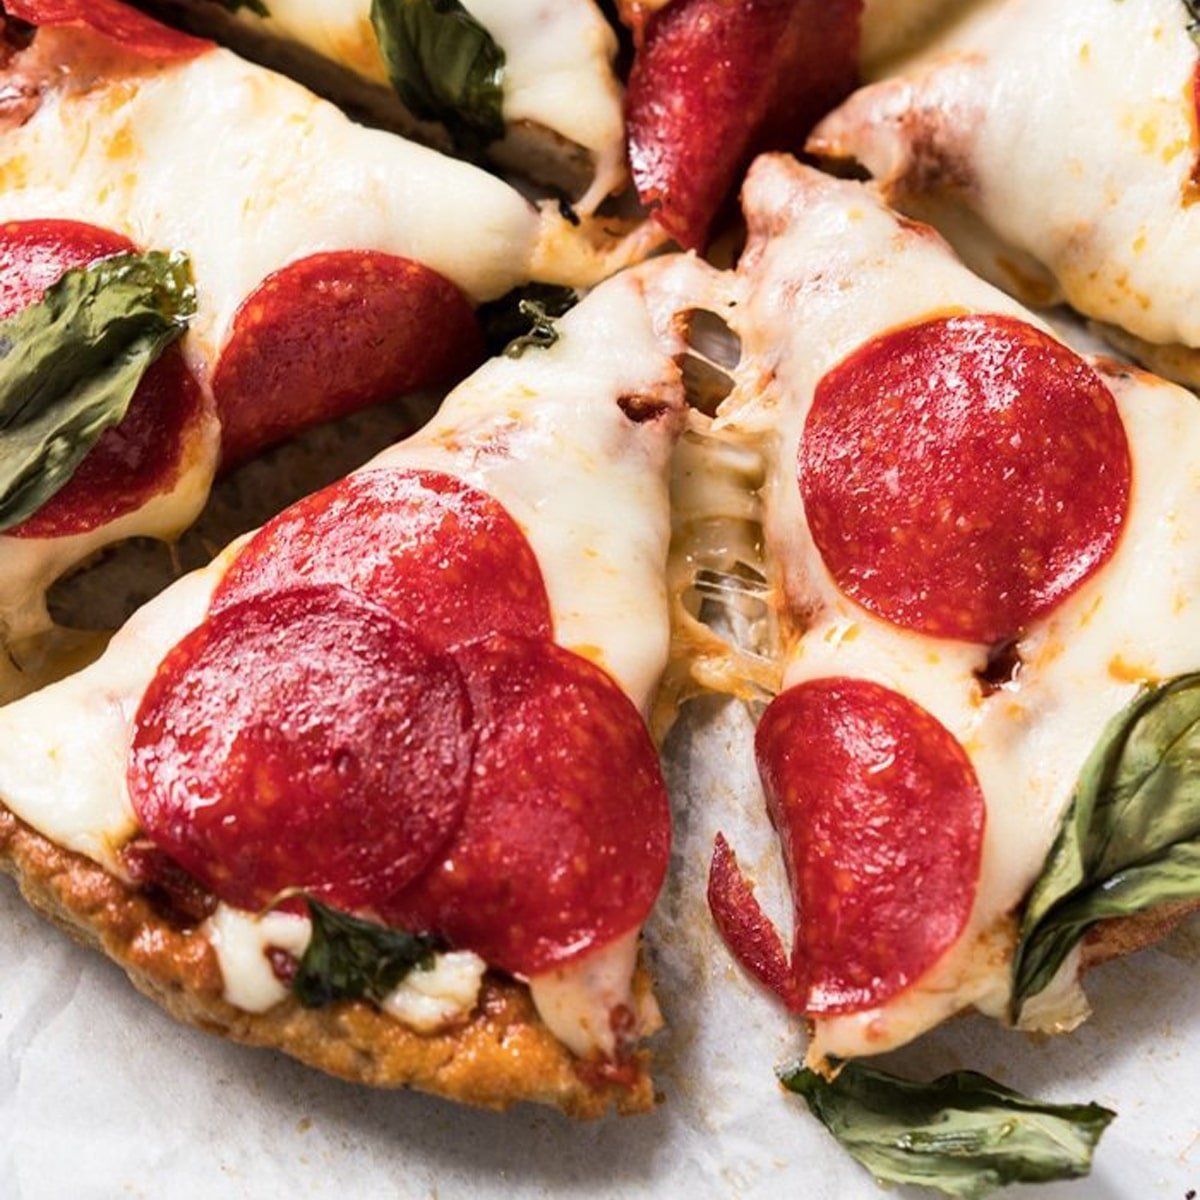 Fluffy keto pizza crust with yeast